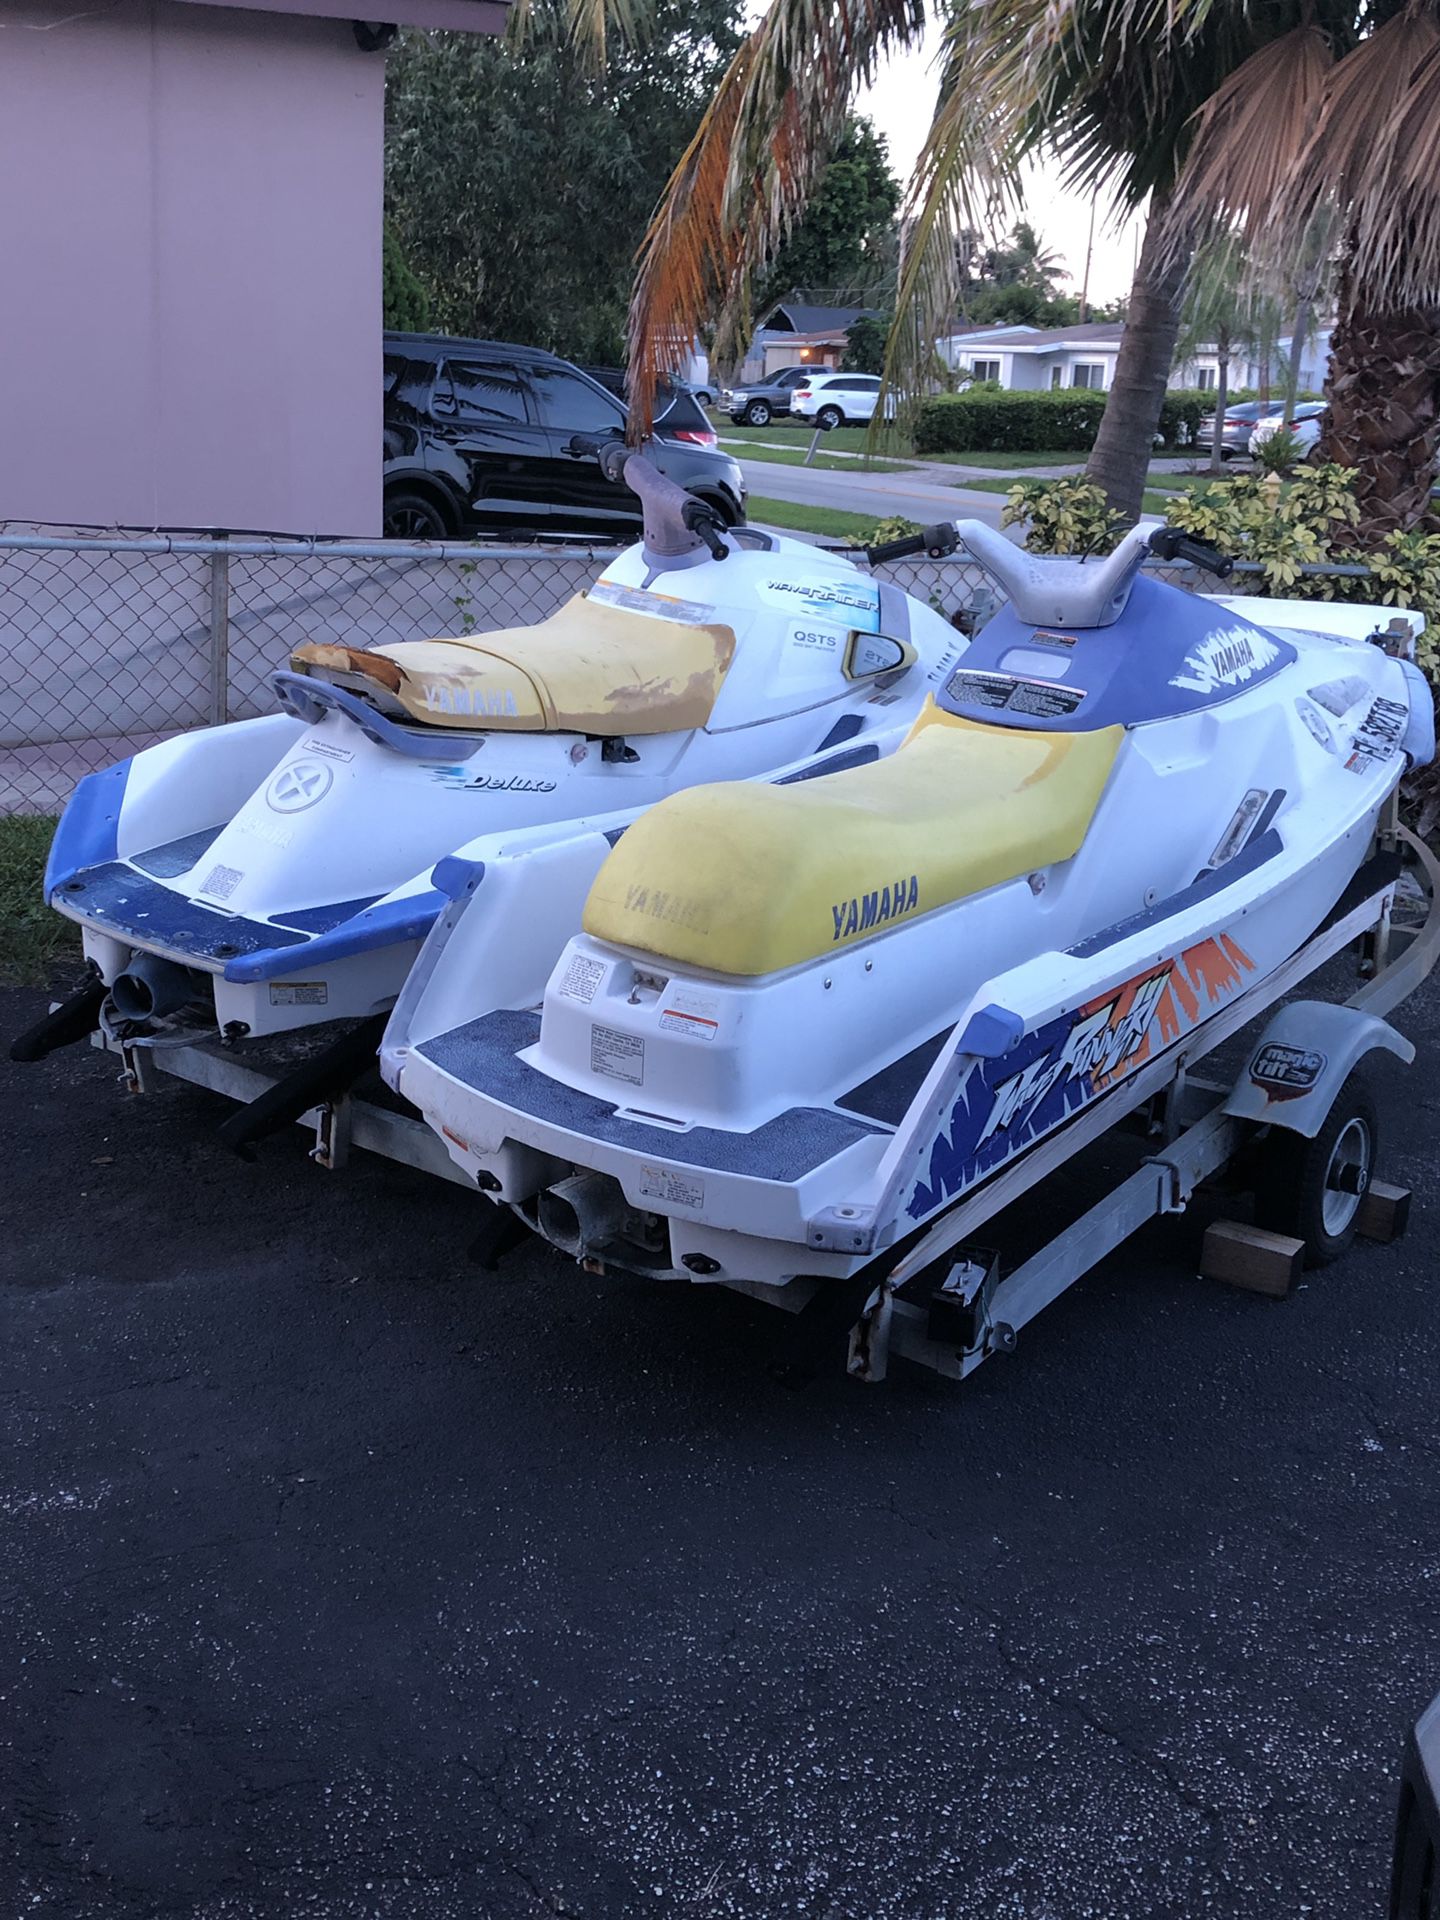 Two Jetskis and Double Trailer